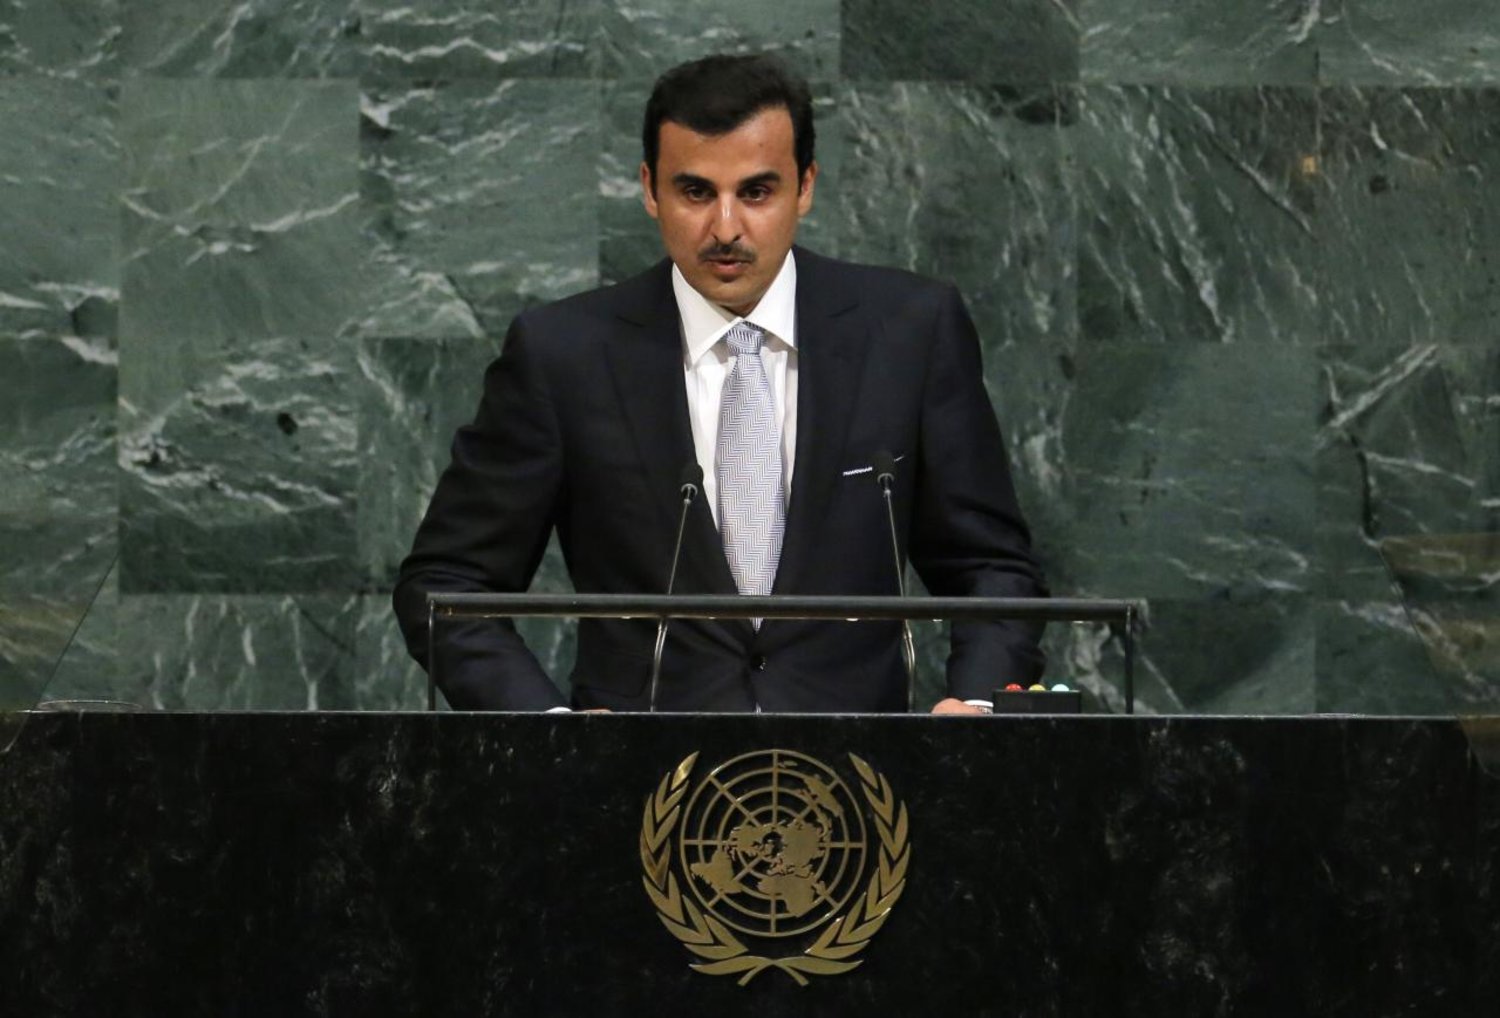 Qatar Emir Sheikh Tamim bin Hamad al-Thani addresses the 72nd United Nations General Assembly at UN headquarters in New York, US, September 19, 2017. REUTERS/Lucas Jacksonz